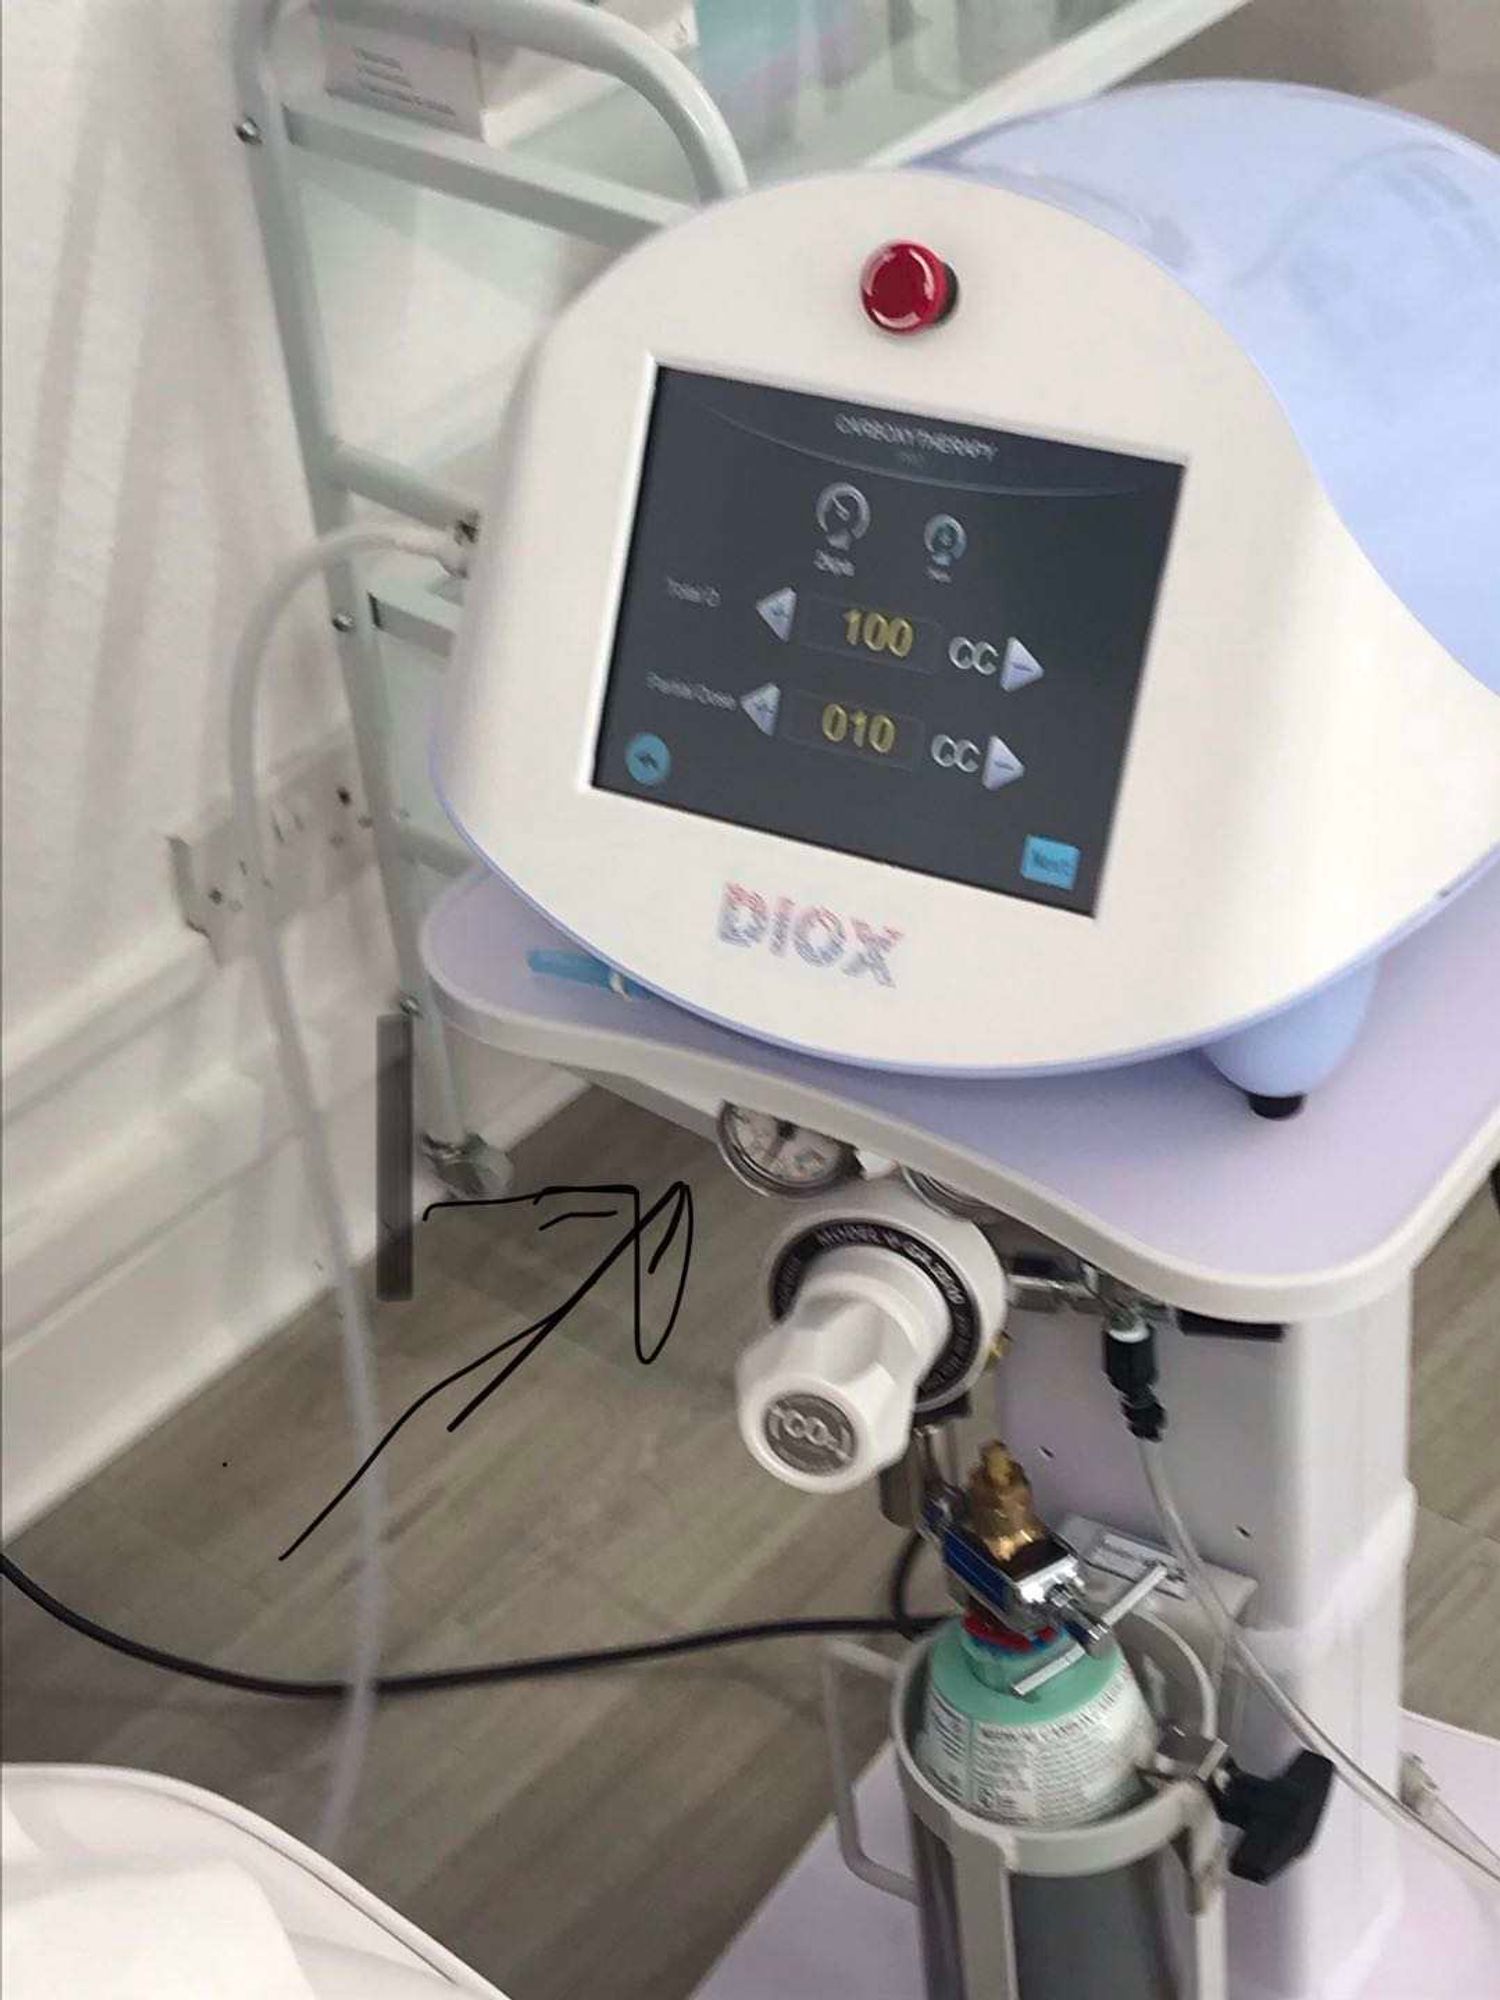 carbontherapy machine working in the therapy